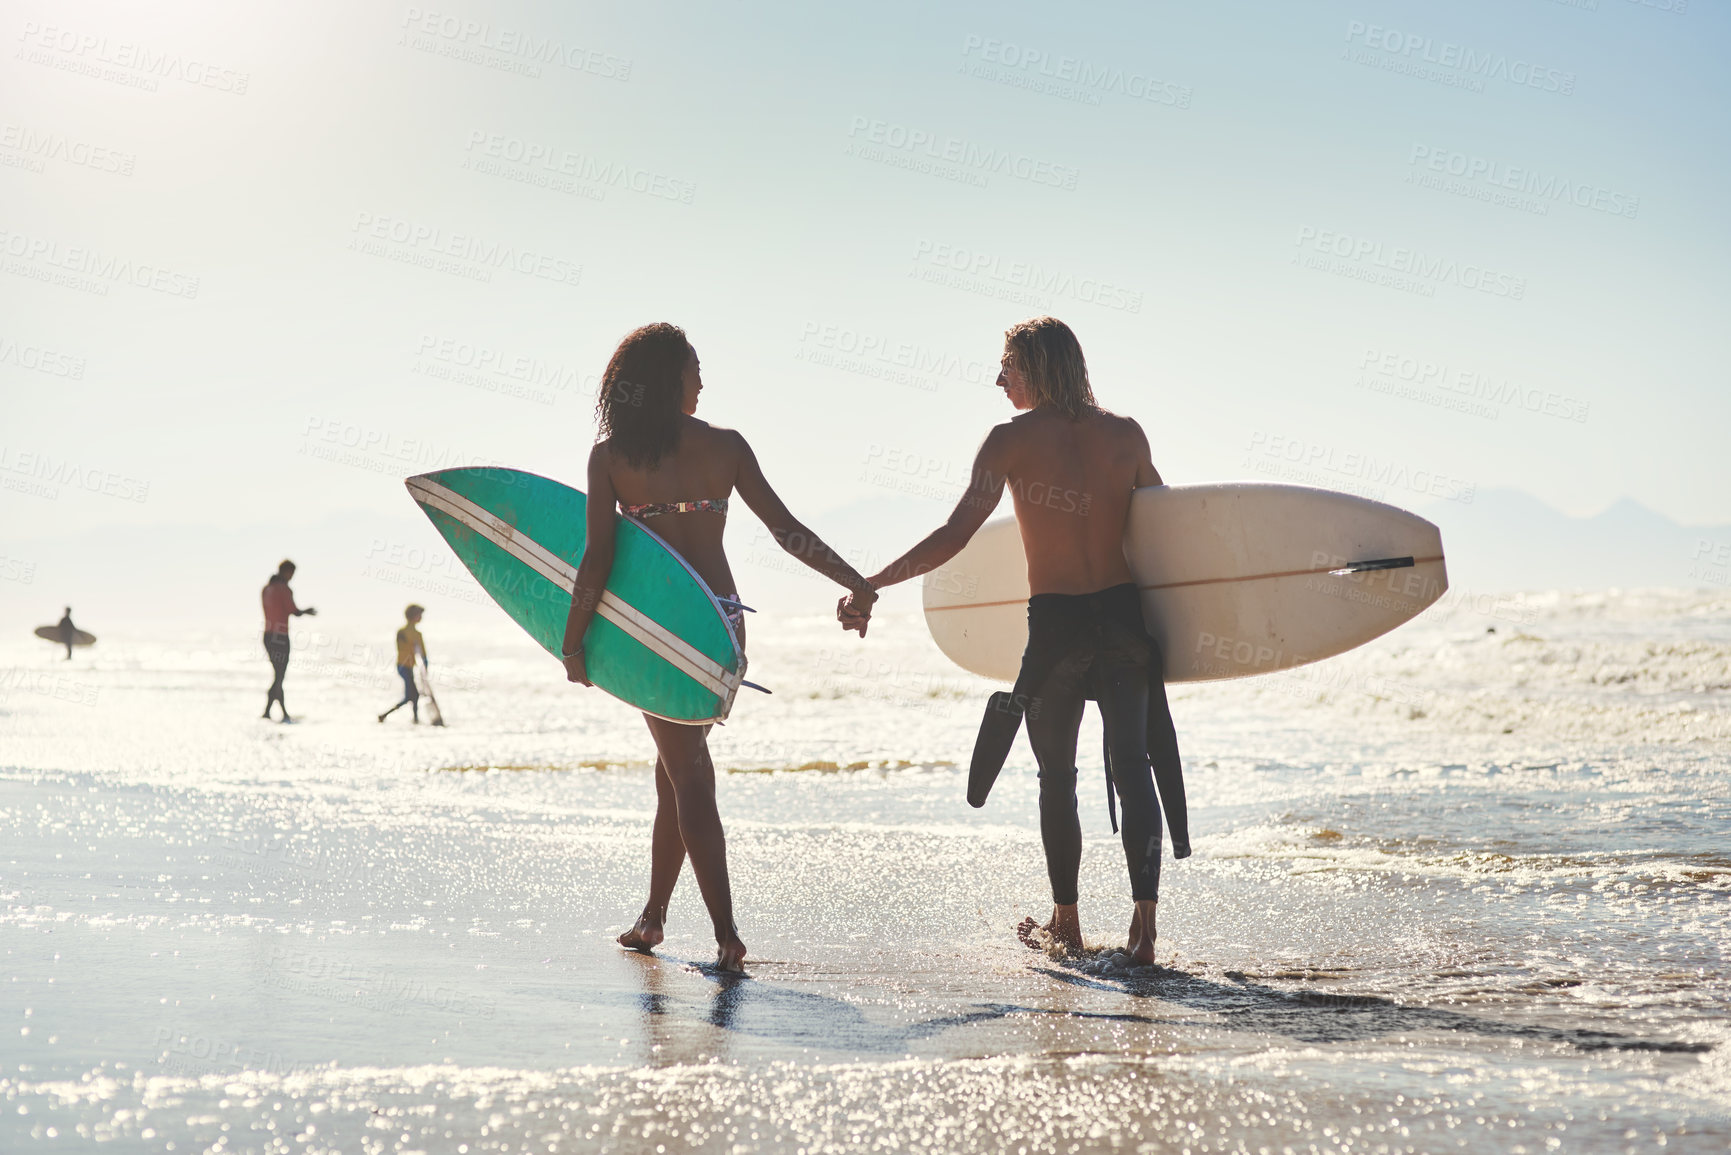 Buy stock photo Shot of a young couple spending the day at the beach with their surfboards